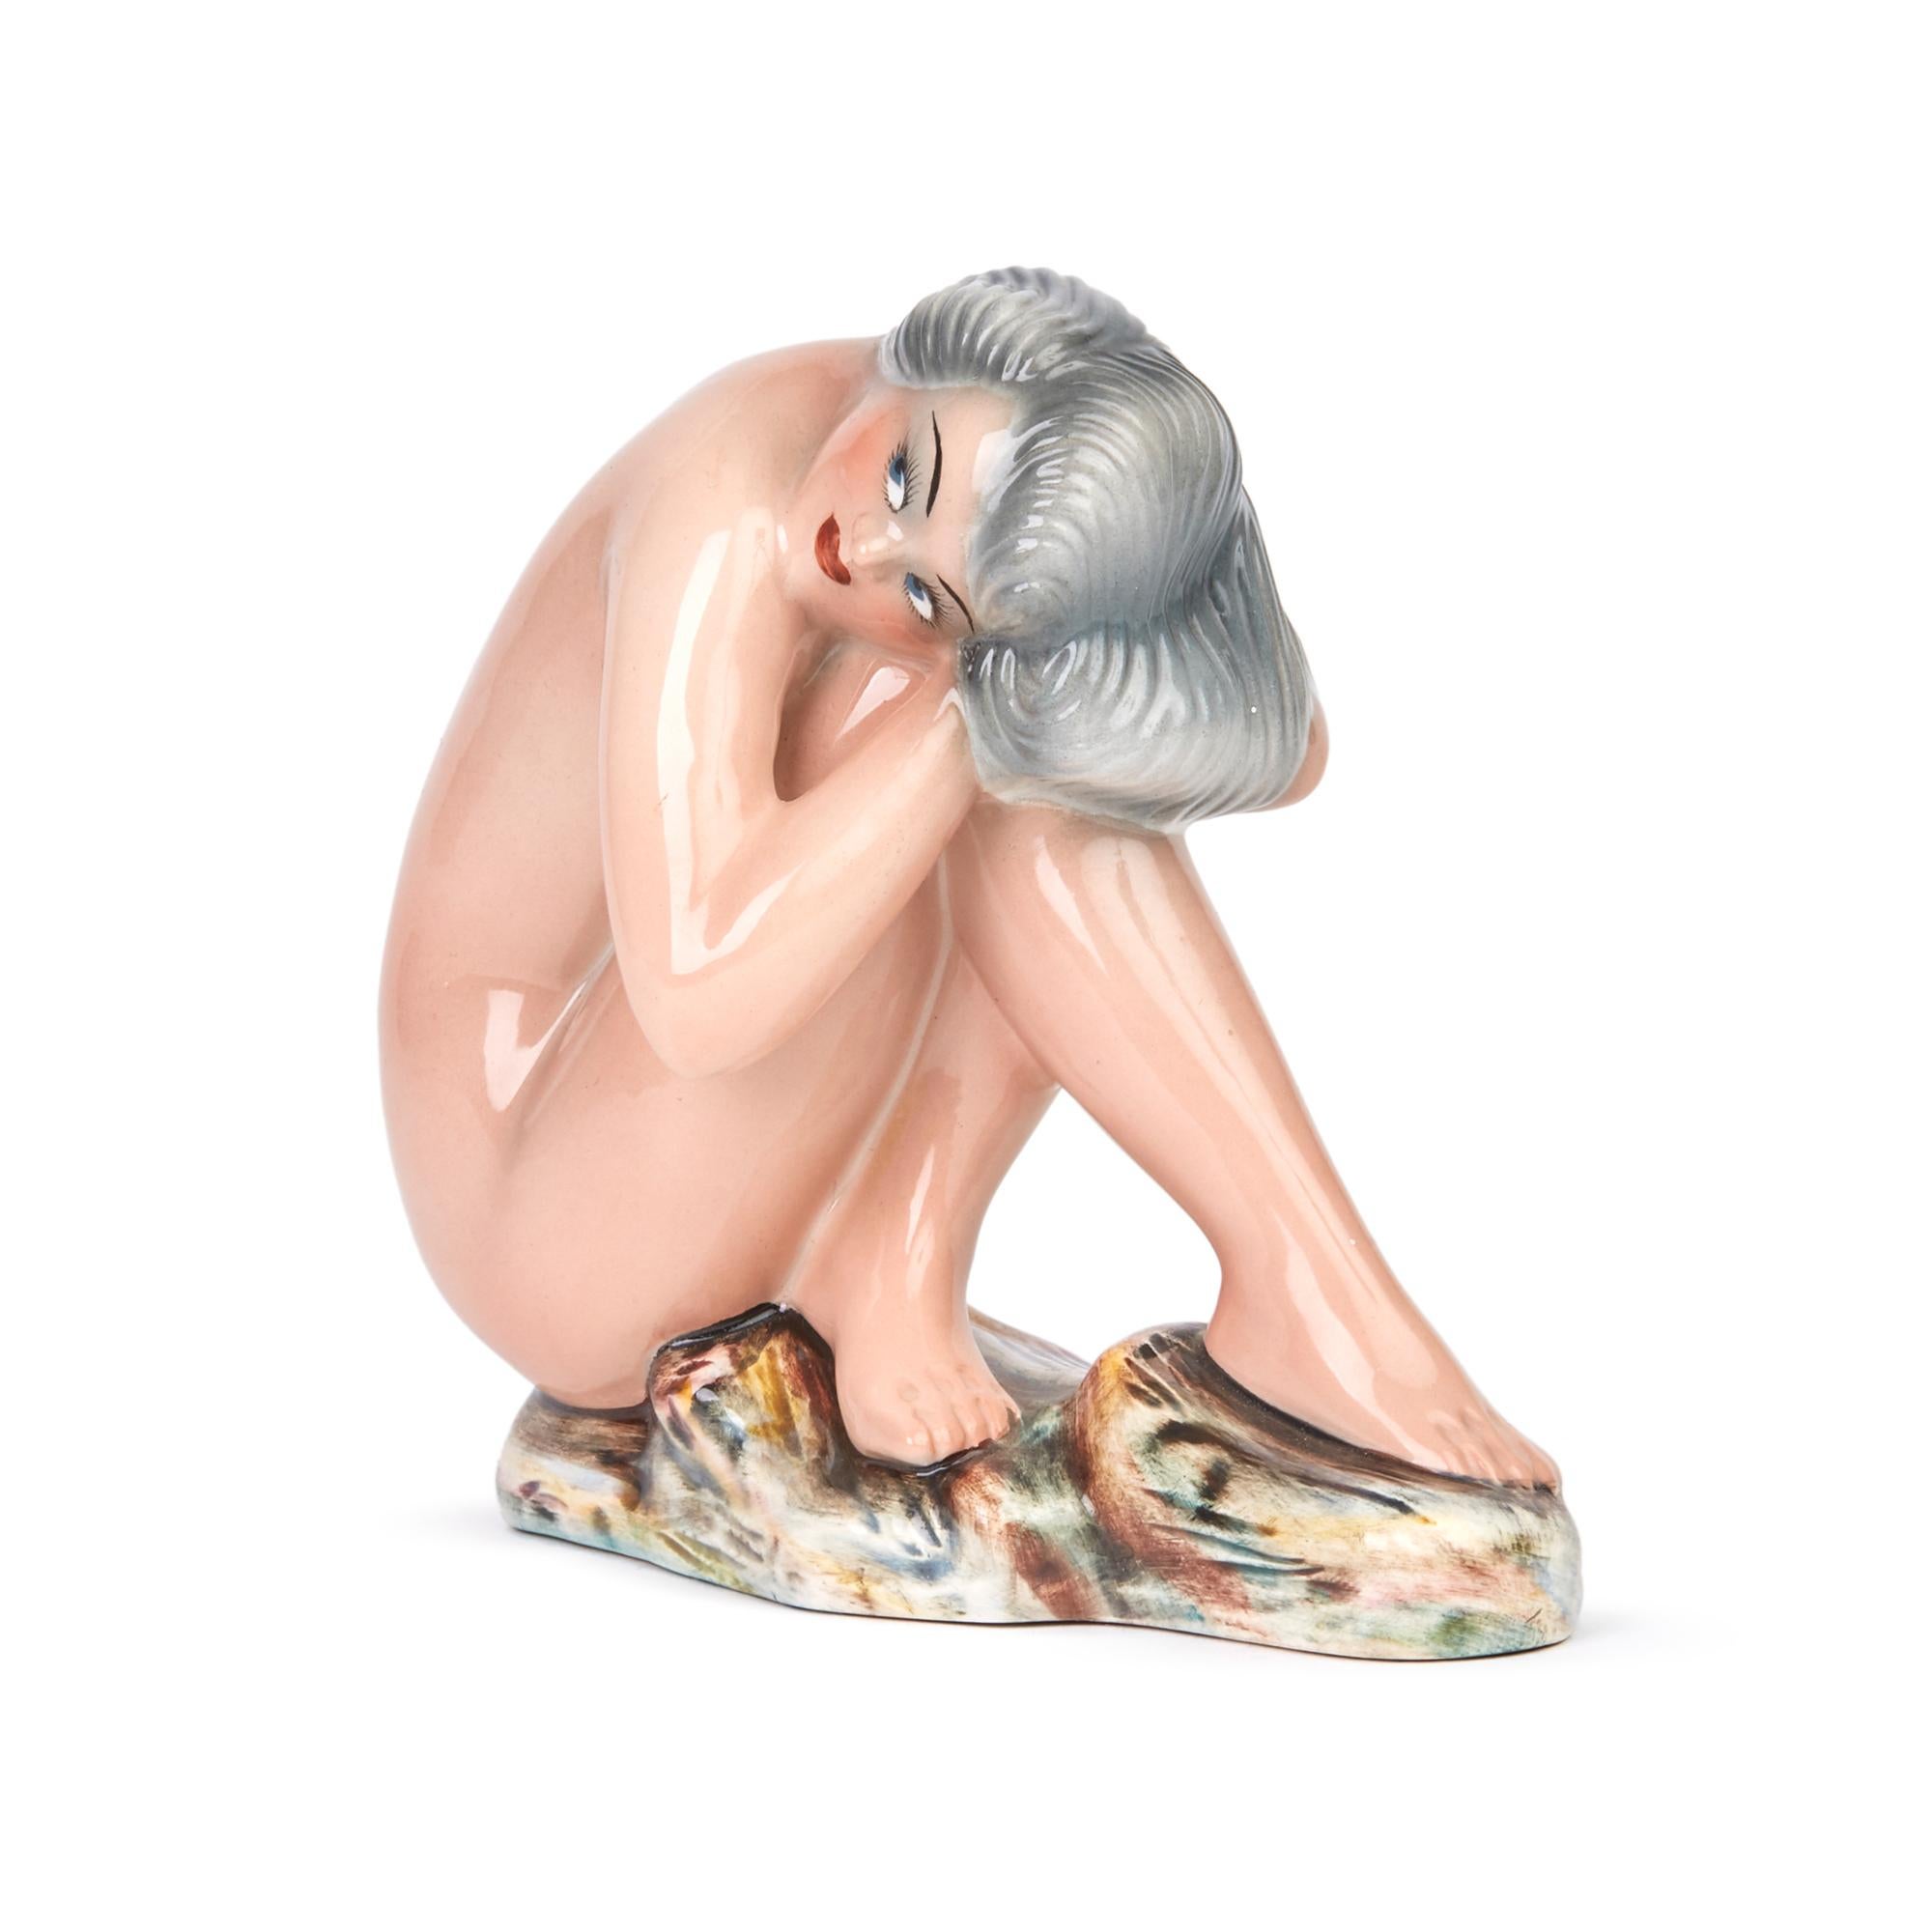 Triart Bassano Italian Art Deco Pottery Seated Nude Figure In Good Condition For Sale In Bishop's Stortford, Hertfordshire